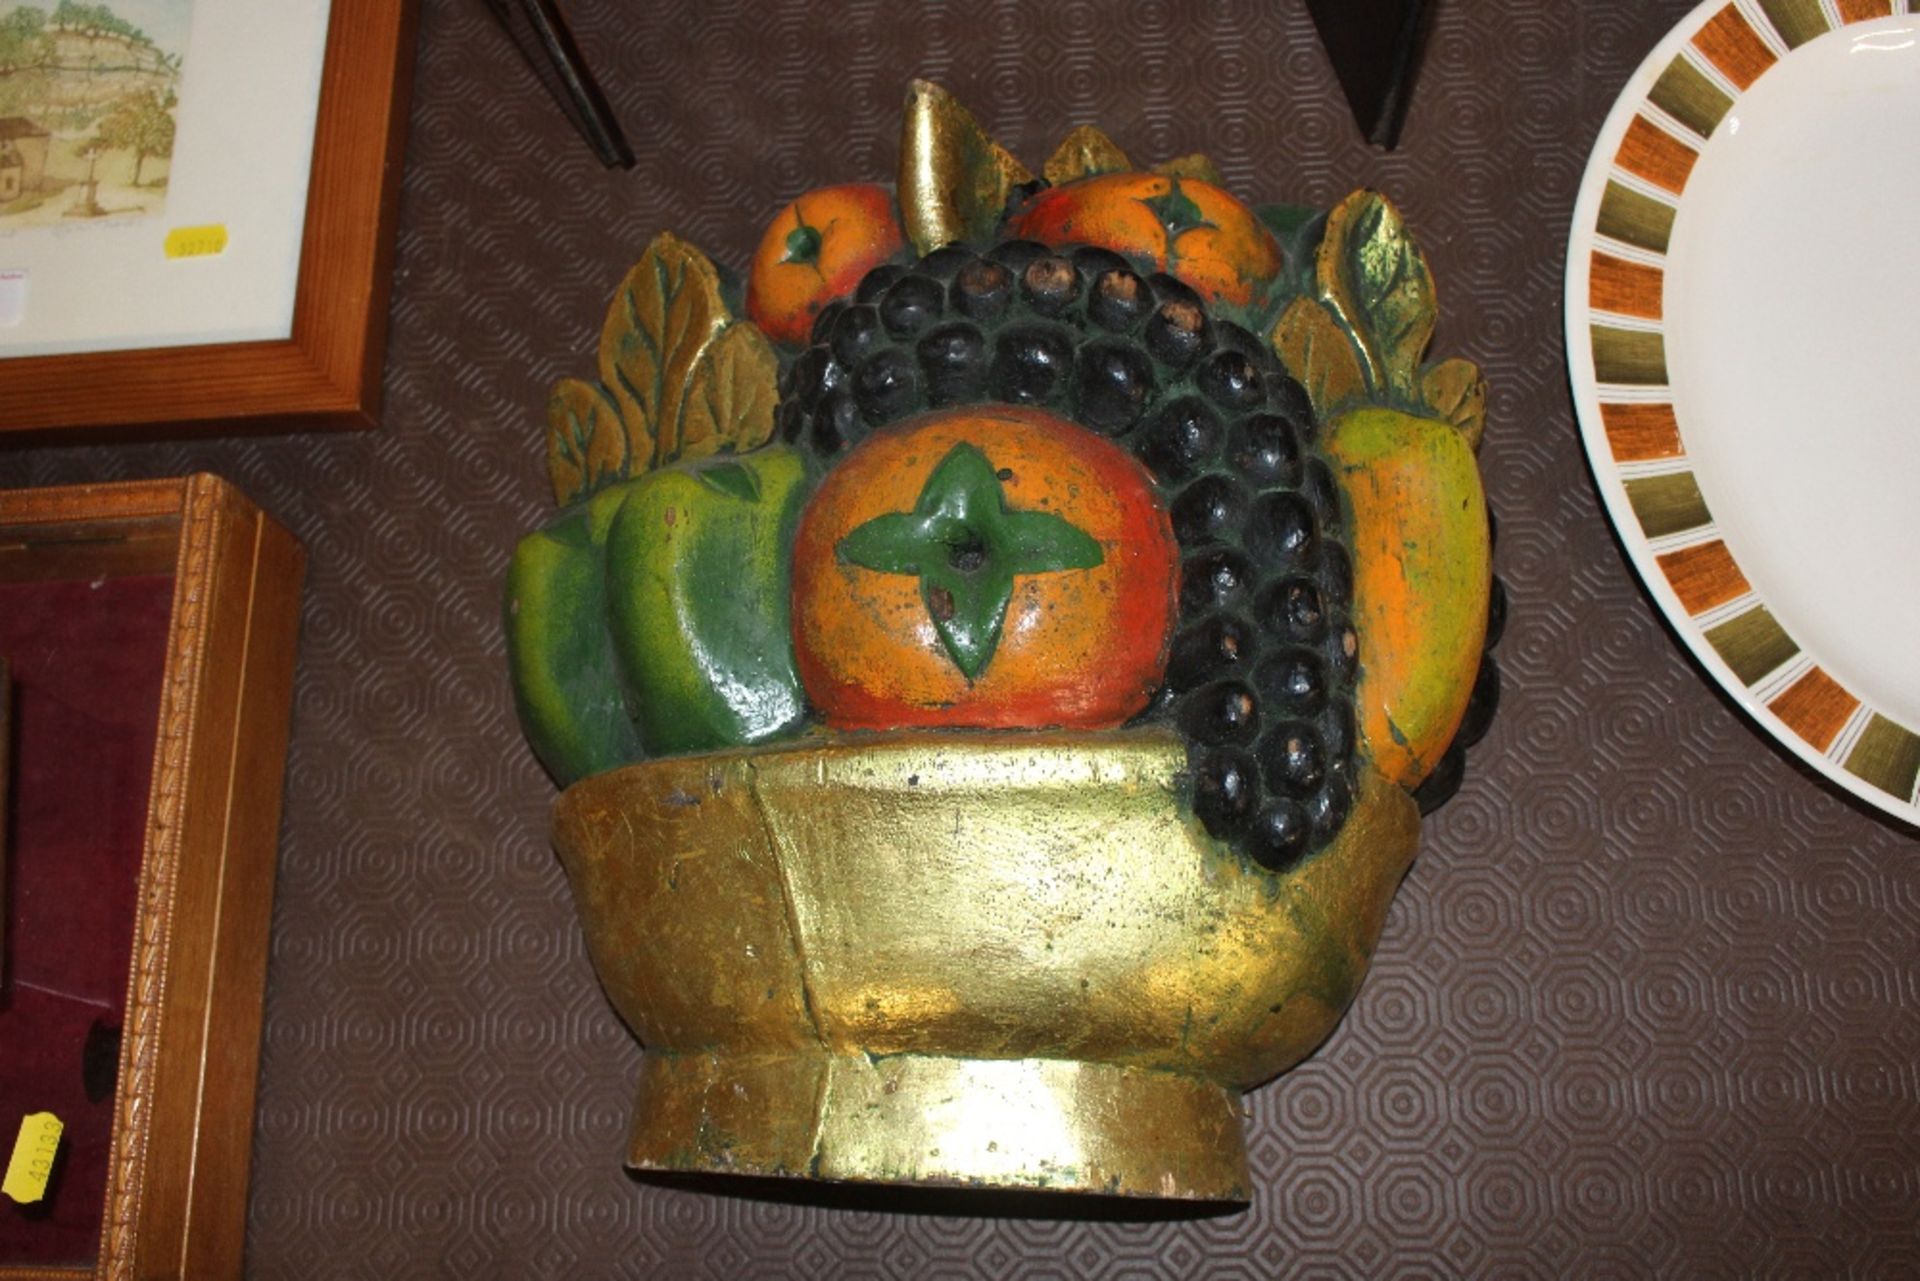 A decorative wooden fruit carving